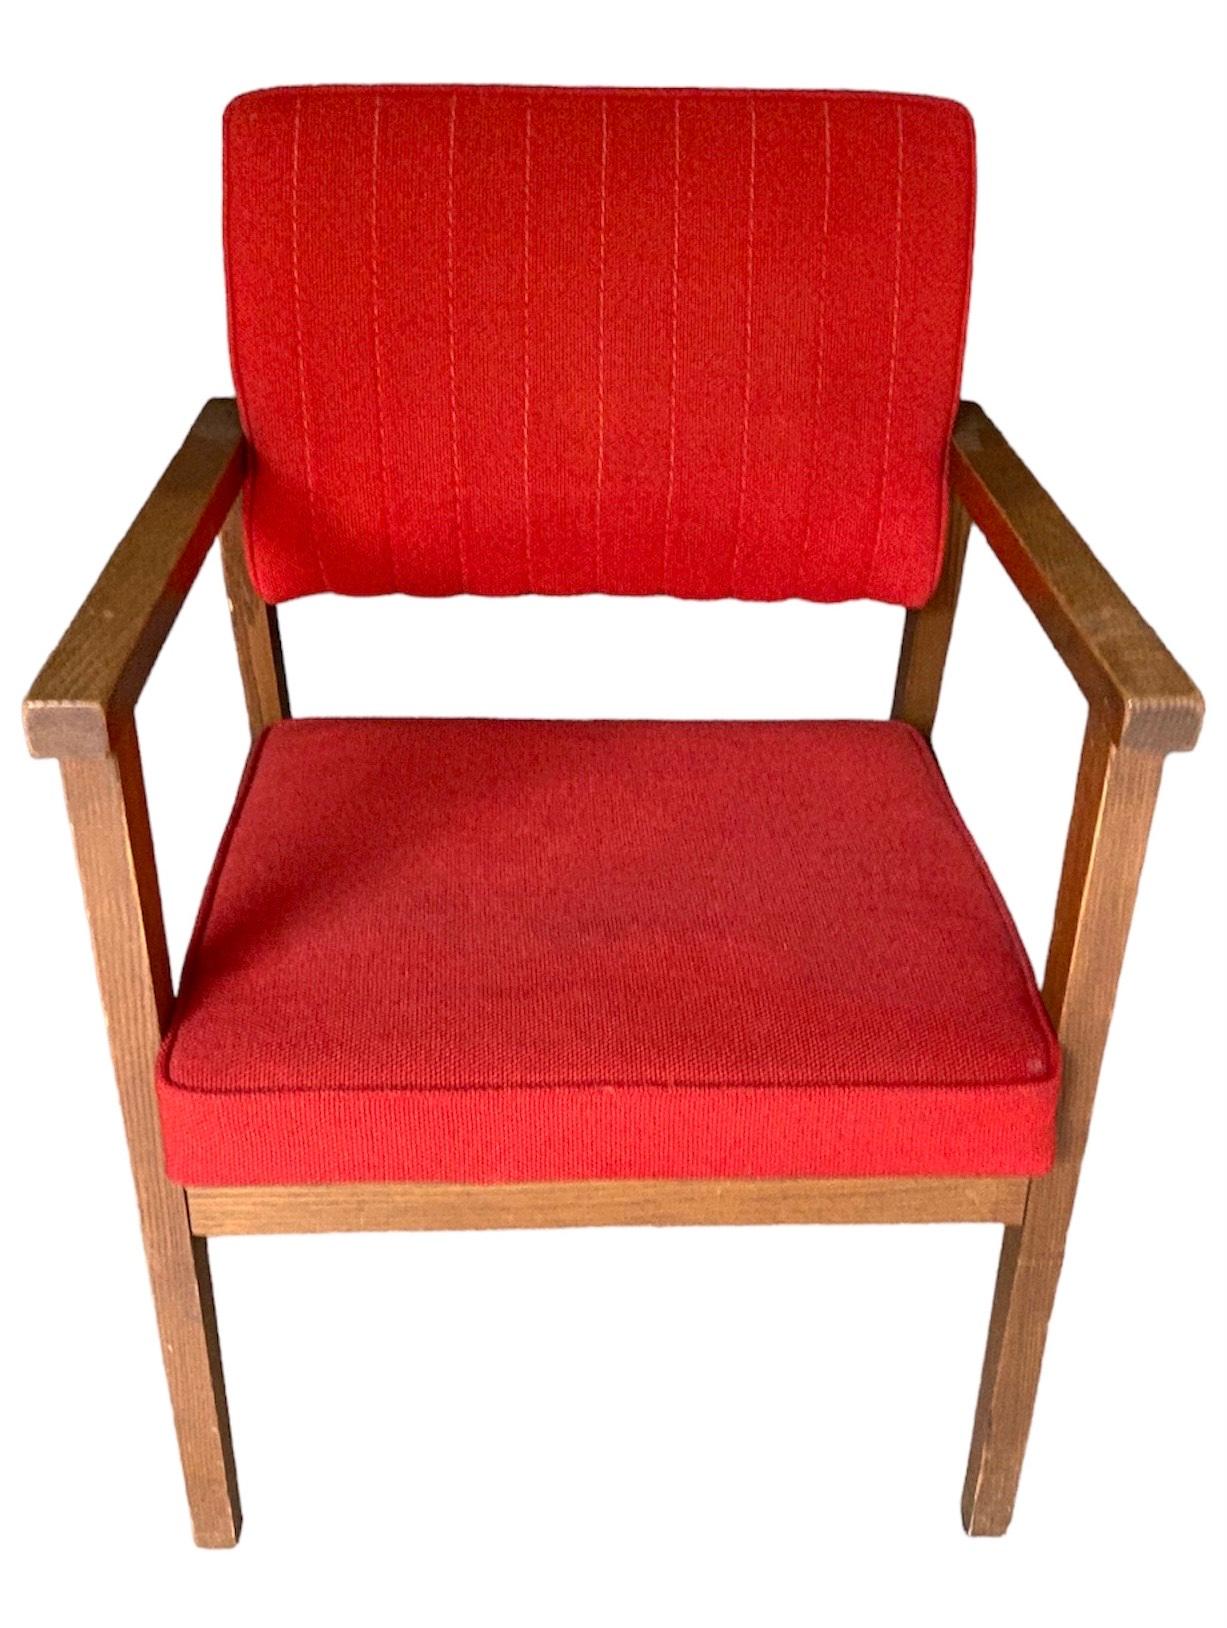 Suite of 4 Red Armchairs Rosewood / Red Jersey Canadian Atlas Furniture For Sale 2